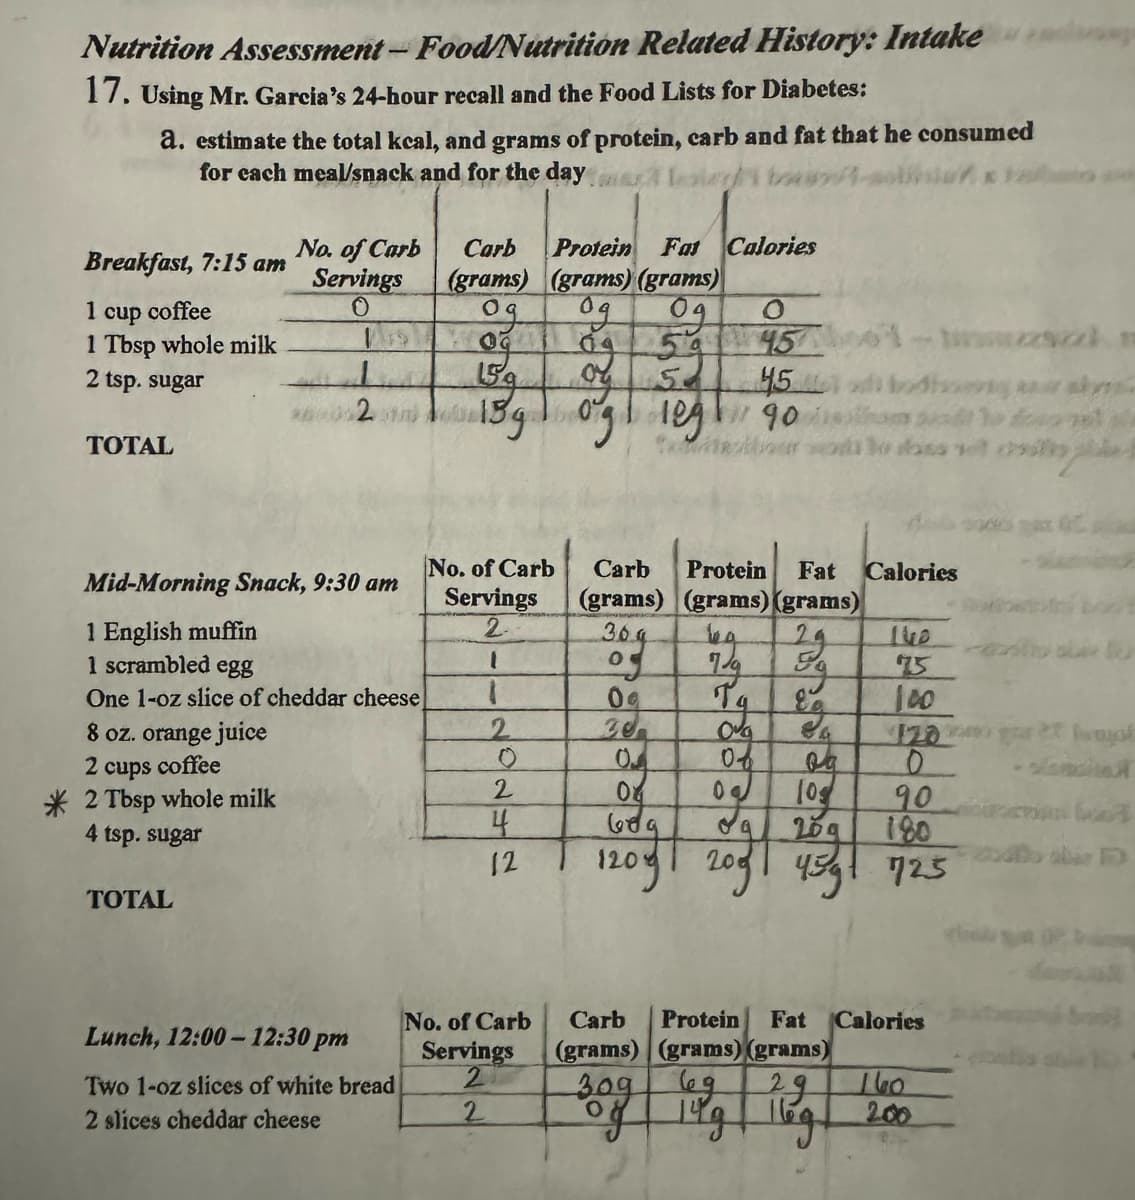 Nutrition Assessment - Food/Nutrition Related History: Intake
17. Using Mr. Garcia's 24-hour recall and the Food Lists for Diabetes:
a. estimate the total kcal, and grams of protein, carb and fat that he consumed
for each meal/snack and for the day is
Breakfast, 7:15 am
No. of Carb
Servings
Carb Protein Fat Calories
(grams) (grams) (grams)
1
cup
coffee
0
Од
09
0
1 Tbsp whole milk
0
2 tsp. sugar
15g
Låg
5
45
452
45
2
og leg 90
TOTAL
No. of Carb
Mid-Morning Snack, 9:30 am
Servings
Carb Protein Fat Calories
(grams) (grams) (grams)
1 English muffin
2
309
29
140
1 scrambled egg
1
75
One 1-oz slice of cheddar cheese
09
Ta
Eg
100
8 oz. orange juice
2
20
O
120 g pl
2 cups coffee
0
04
0
09
0
*2 Tbsp whole milk
4 tsp. sugar
TOTAL
247
06
00
Fol
१०
689
209
180
12
120
439
725
No. of Carb
Lunch, 12:00-12:30 pm
Servings
Carb
(grams)
Protein Fat Calories
(grams) (grams)
Two 1-oz slices of white bread
2
30g
Leg
29
160
2 slices cheddar cheese
2
of
19g
16g/200